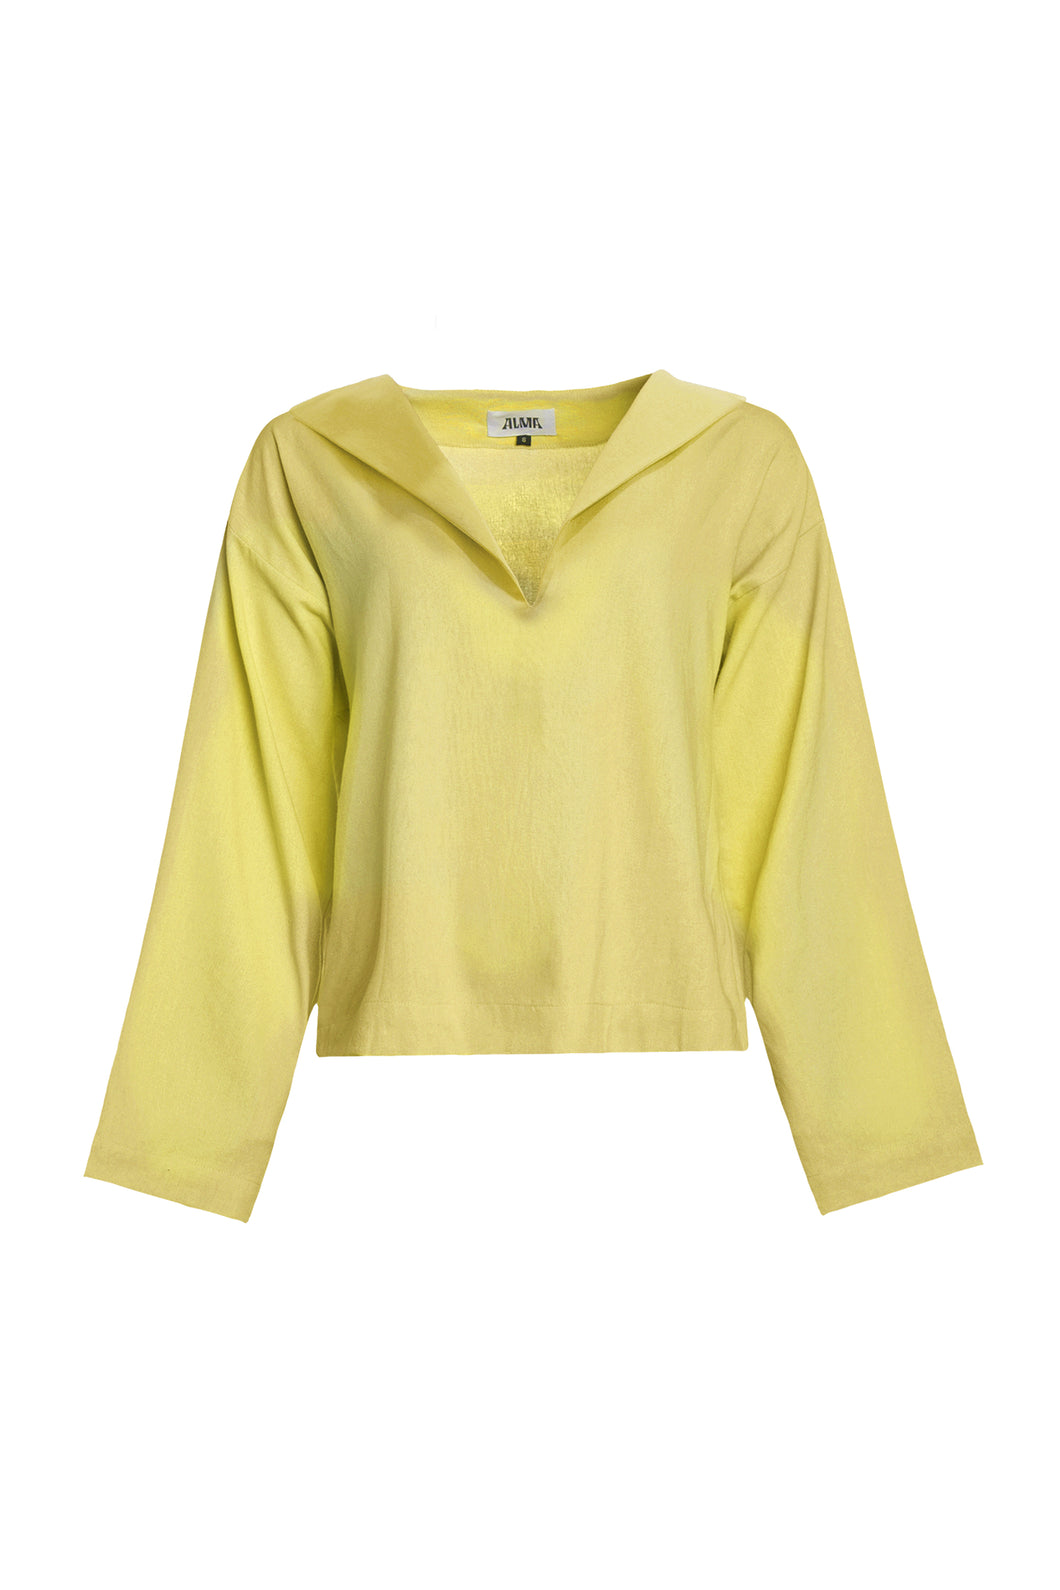 Challenger blouse 2.0 / lime